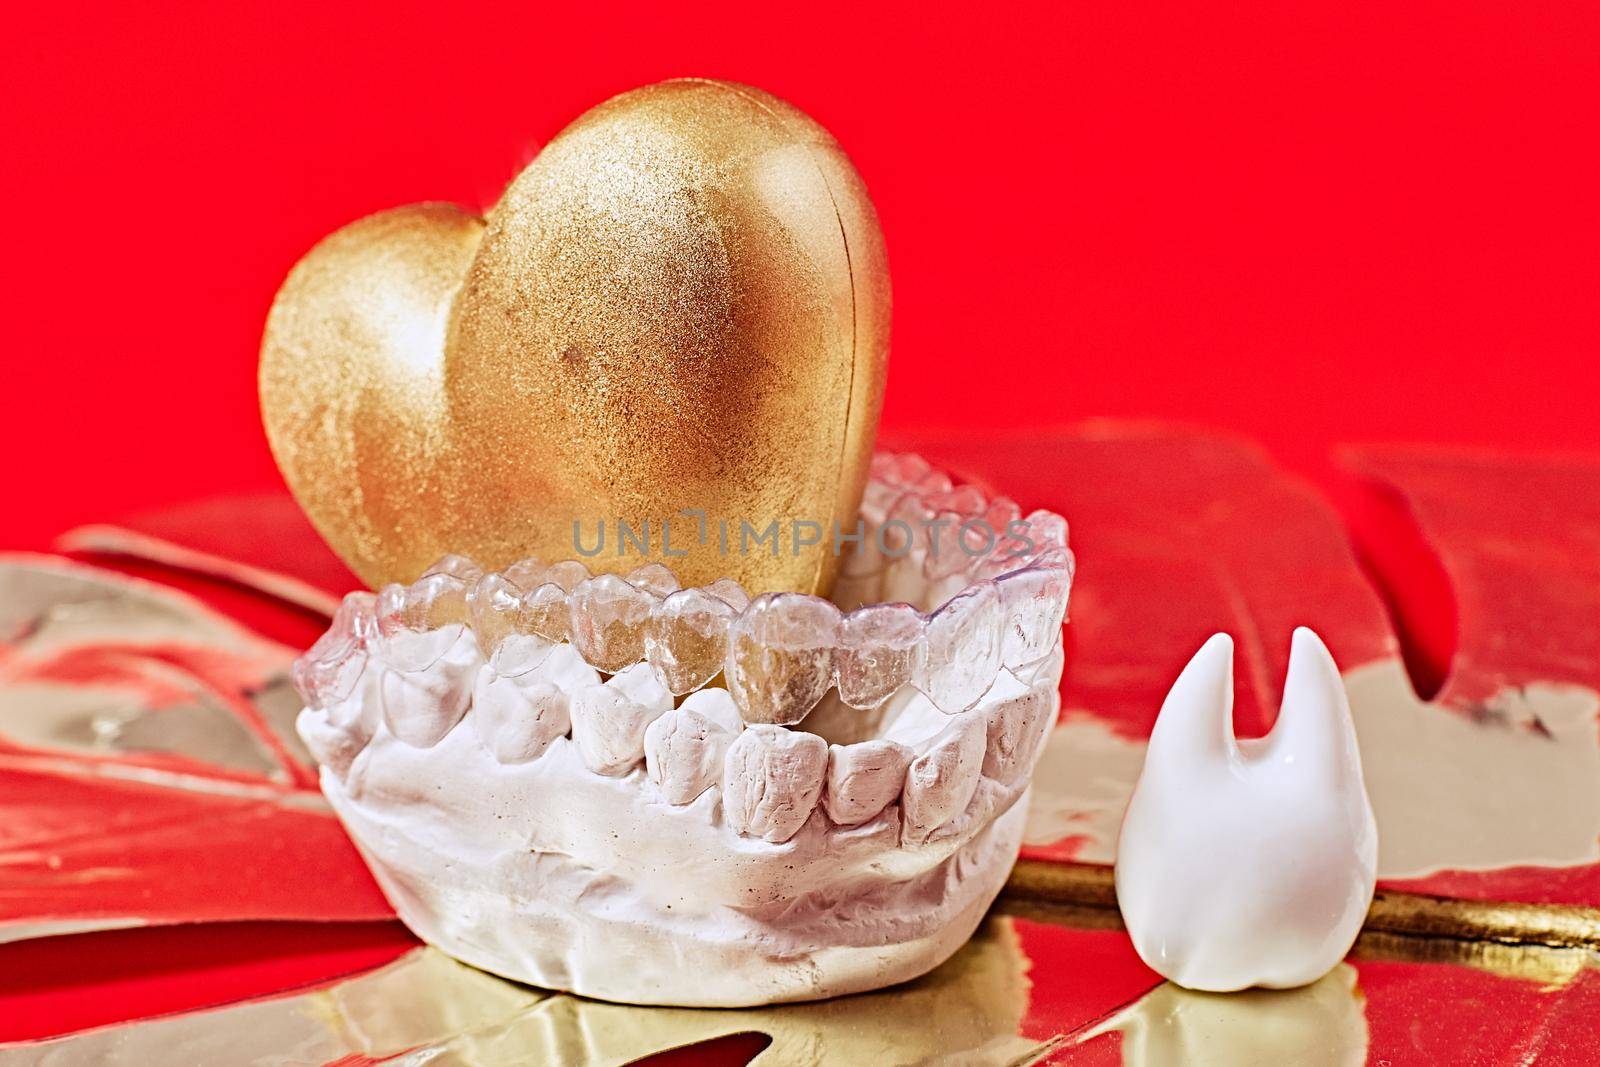 Heart of gold on a red background in invisible dental aligners or braces aplicable for an orthodontic dental treatment by Maximusnd